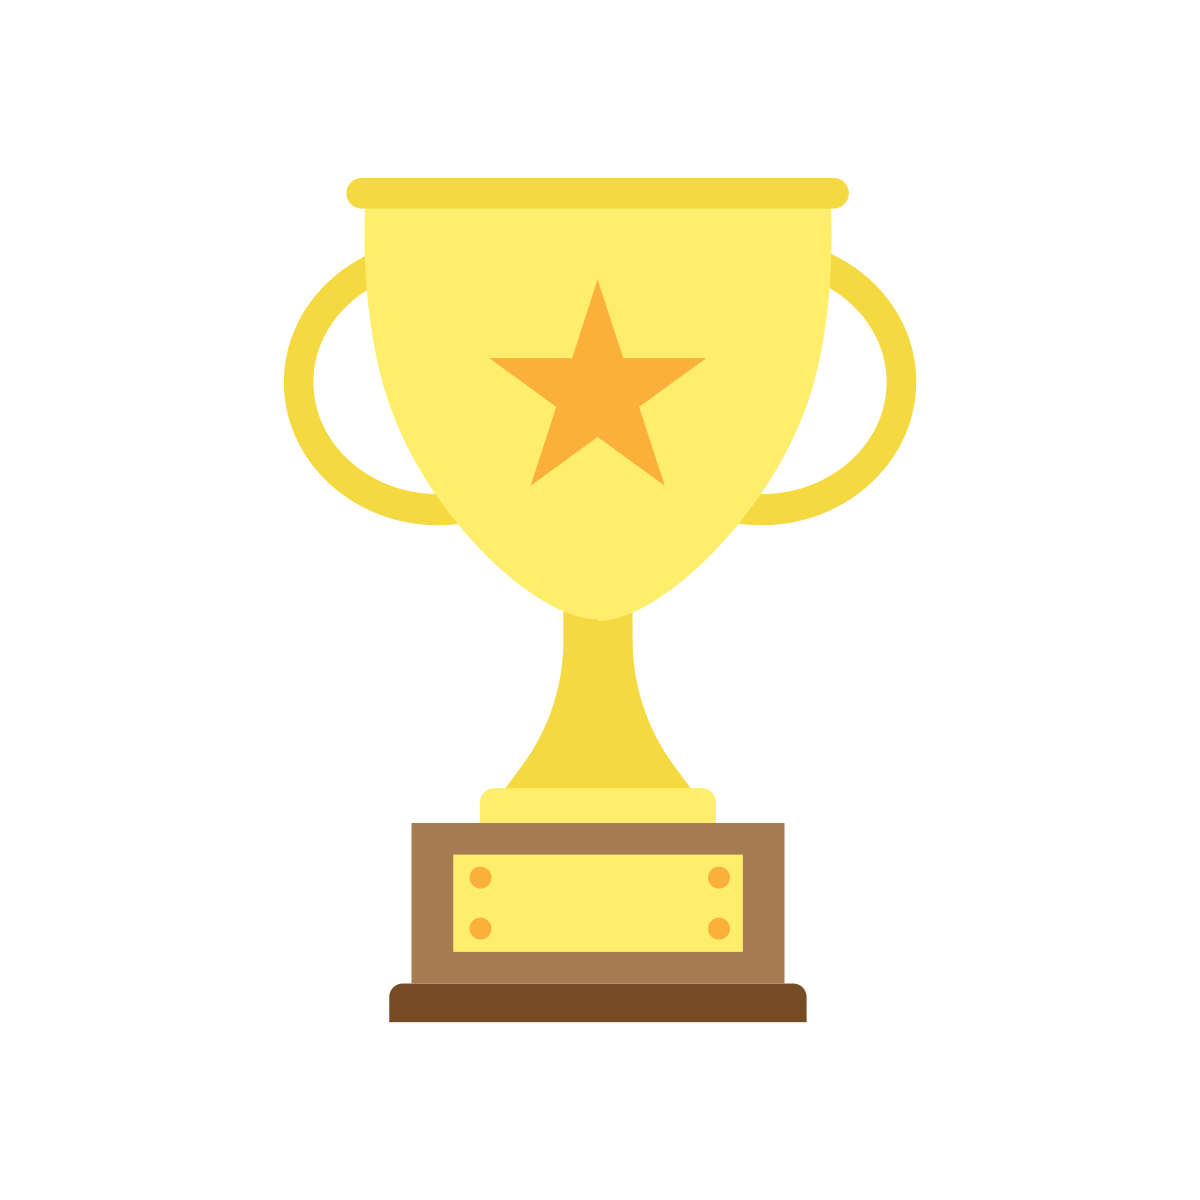 Download File:Trophy Flat Icon.svg - Wikimedia Commons